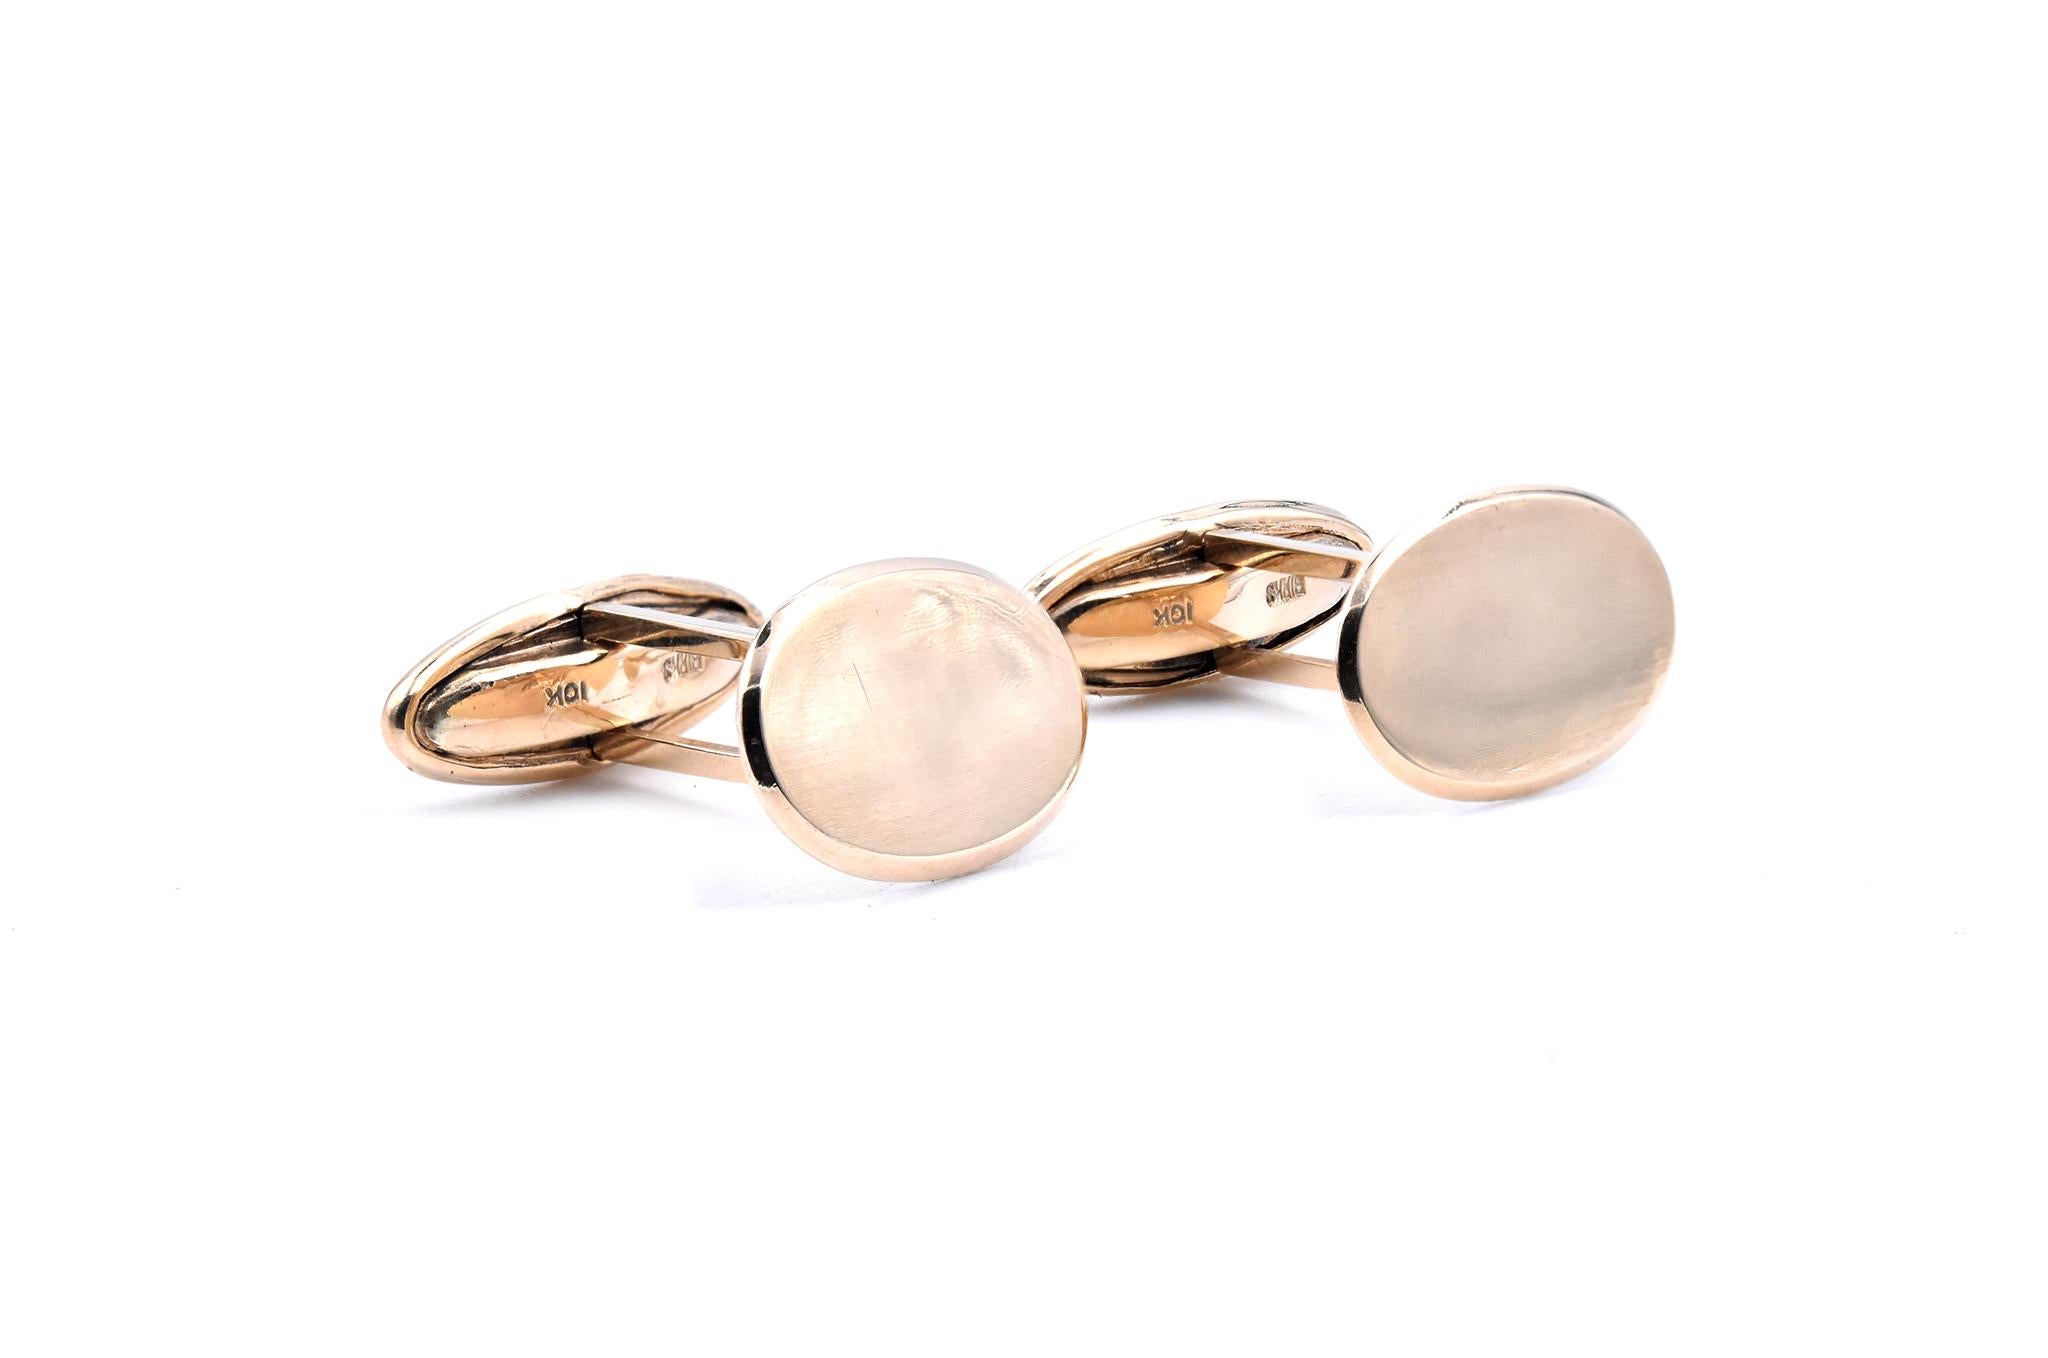 Material: 10k yellow gold
Dimensions: cufflinks measure 12.6 X 19mm 
Weight: 10.0 grams
